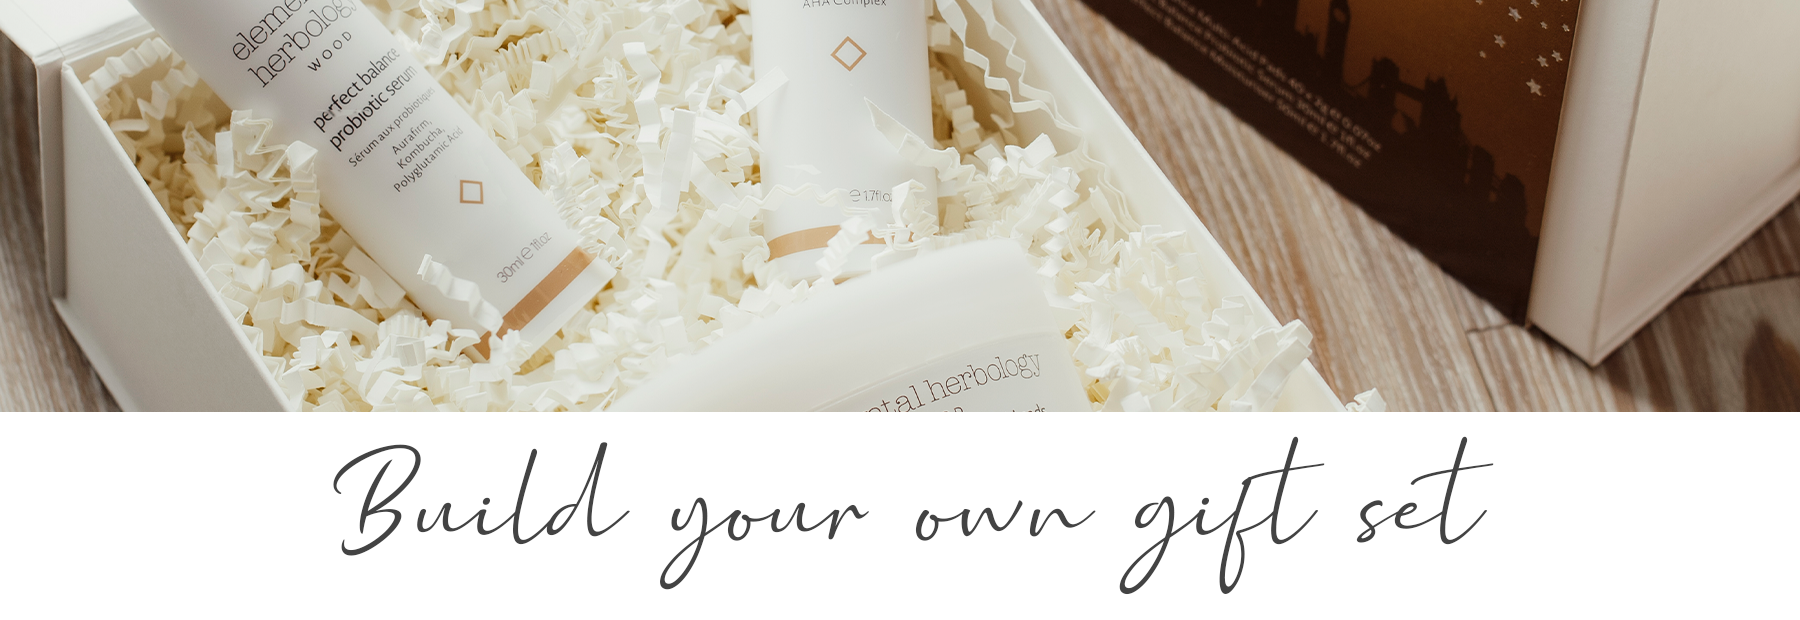 Save 20% when you build your own gift set!